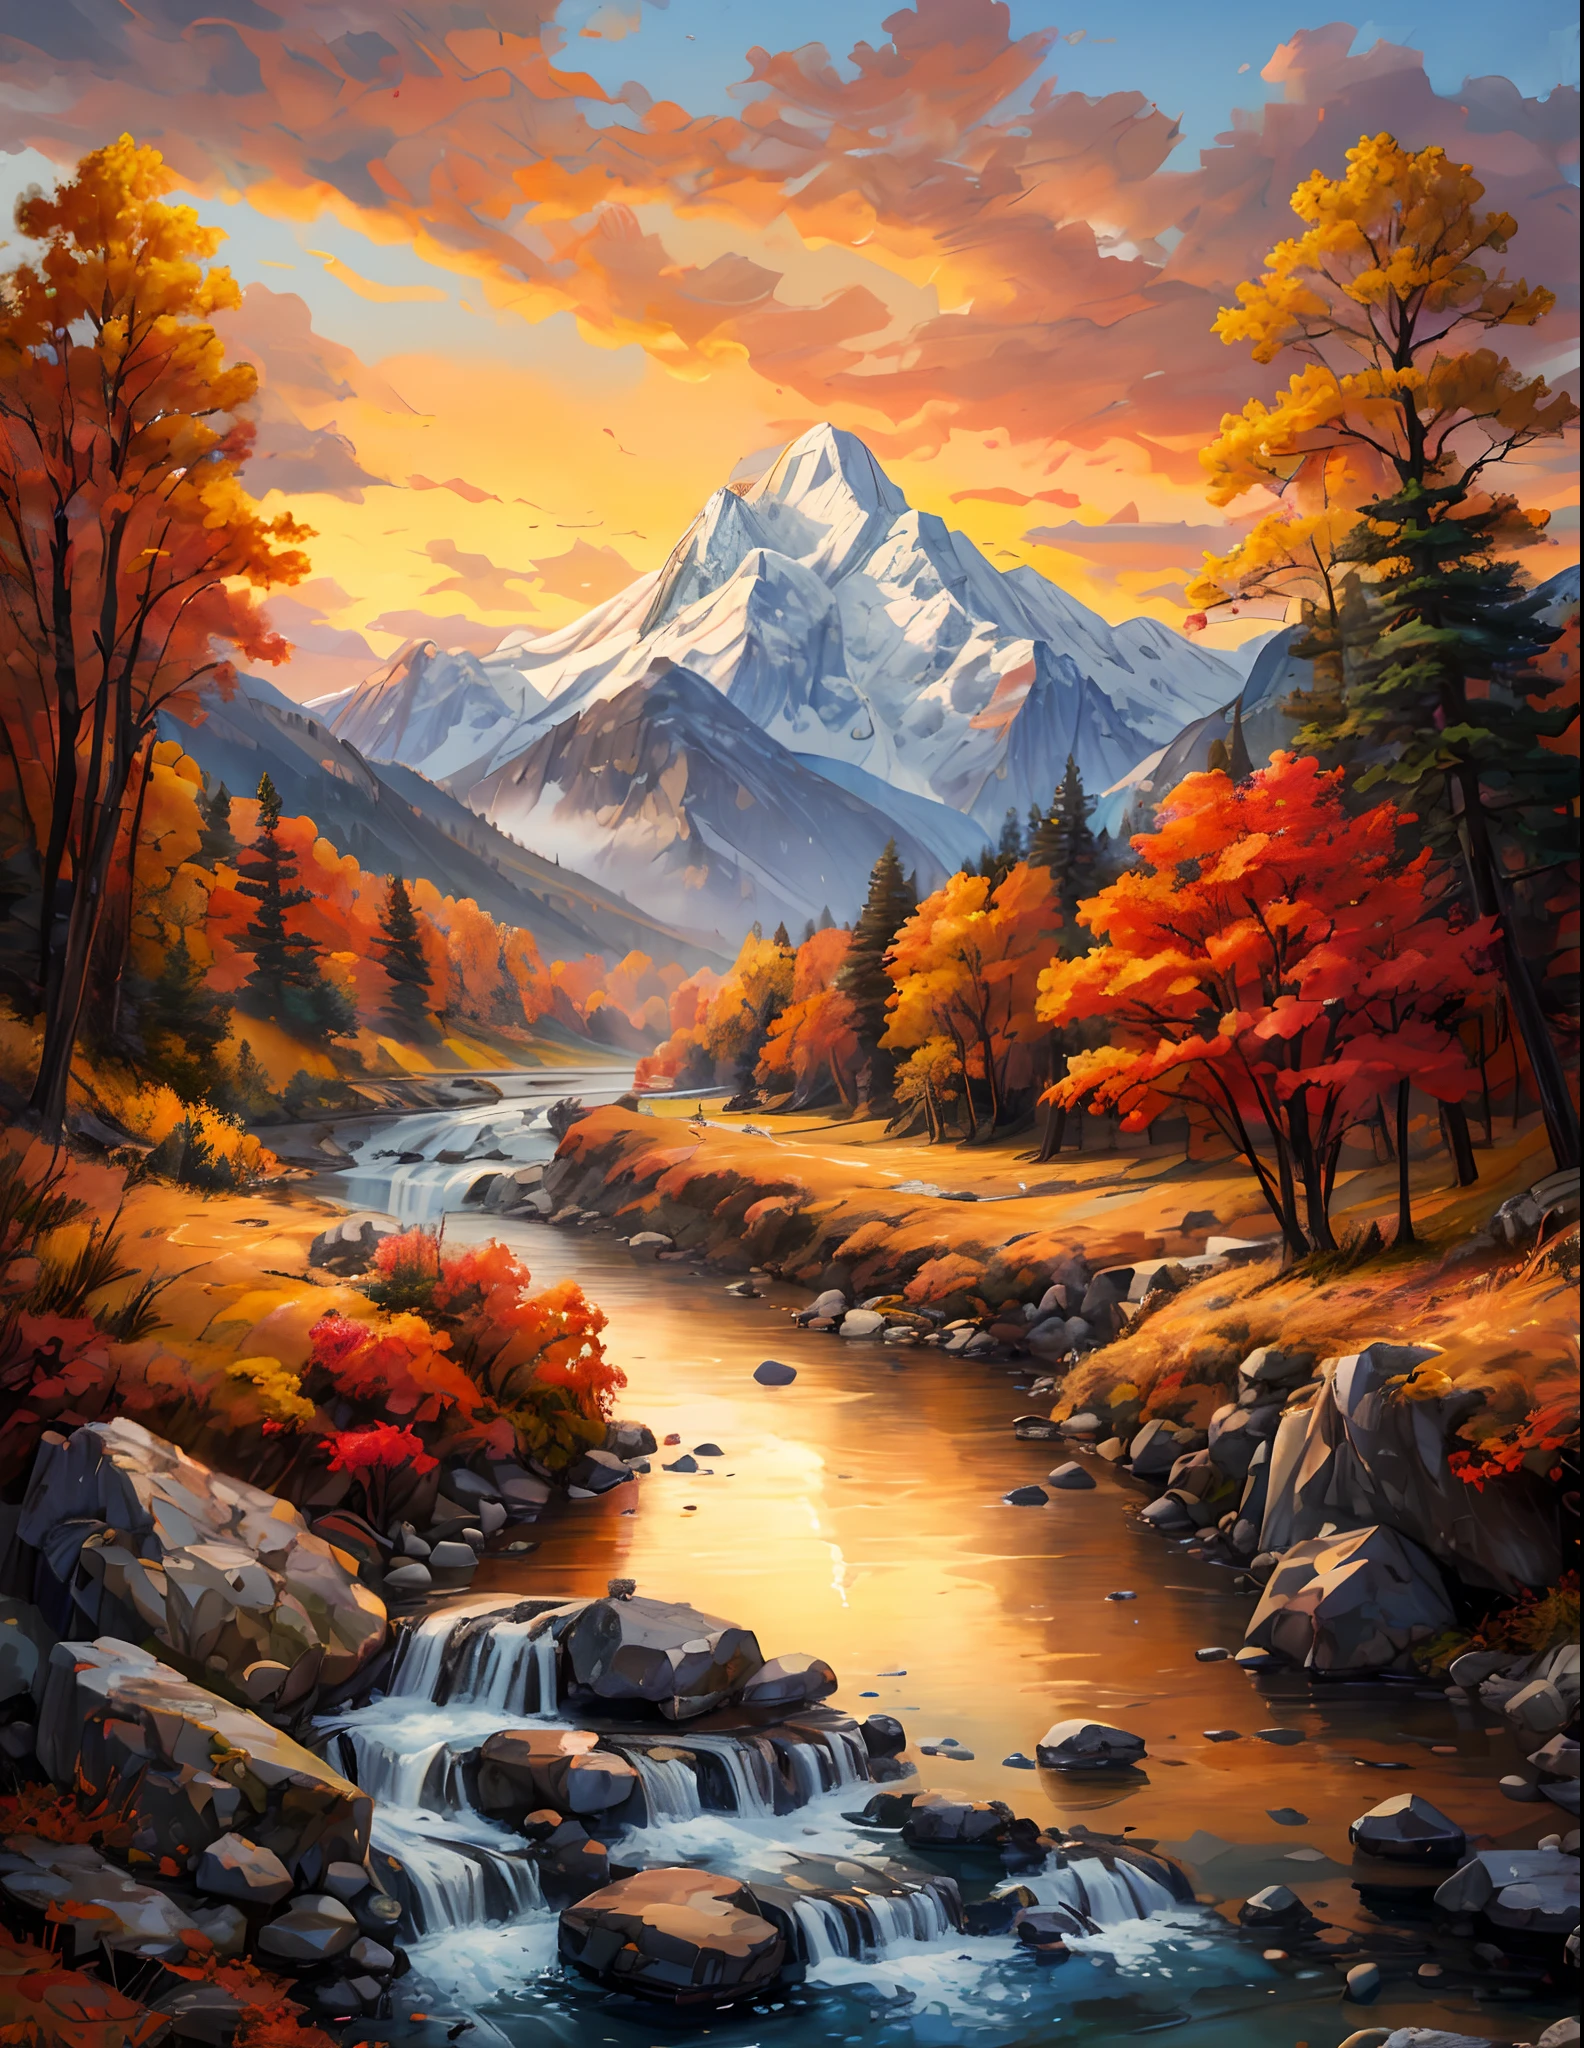 painting of a mountain river with a waterfall and a mountain in the background, autumn mountains, scenery art detailed, detailed painting 4 k, scenery artwork, mountains river trees, majestic landscape, beautiful art uhd 4 k, highly detailed digital painting, vibrant gouache painting scenery, digital painting highly detailed, dramatic autumn landscape, detailed digital painting, detailed landscape, epic beautiful landscape